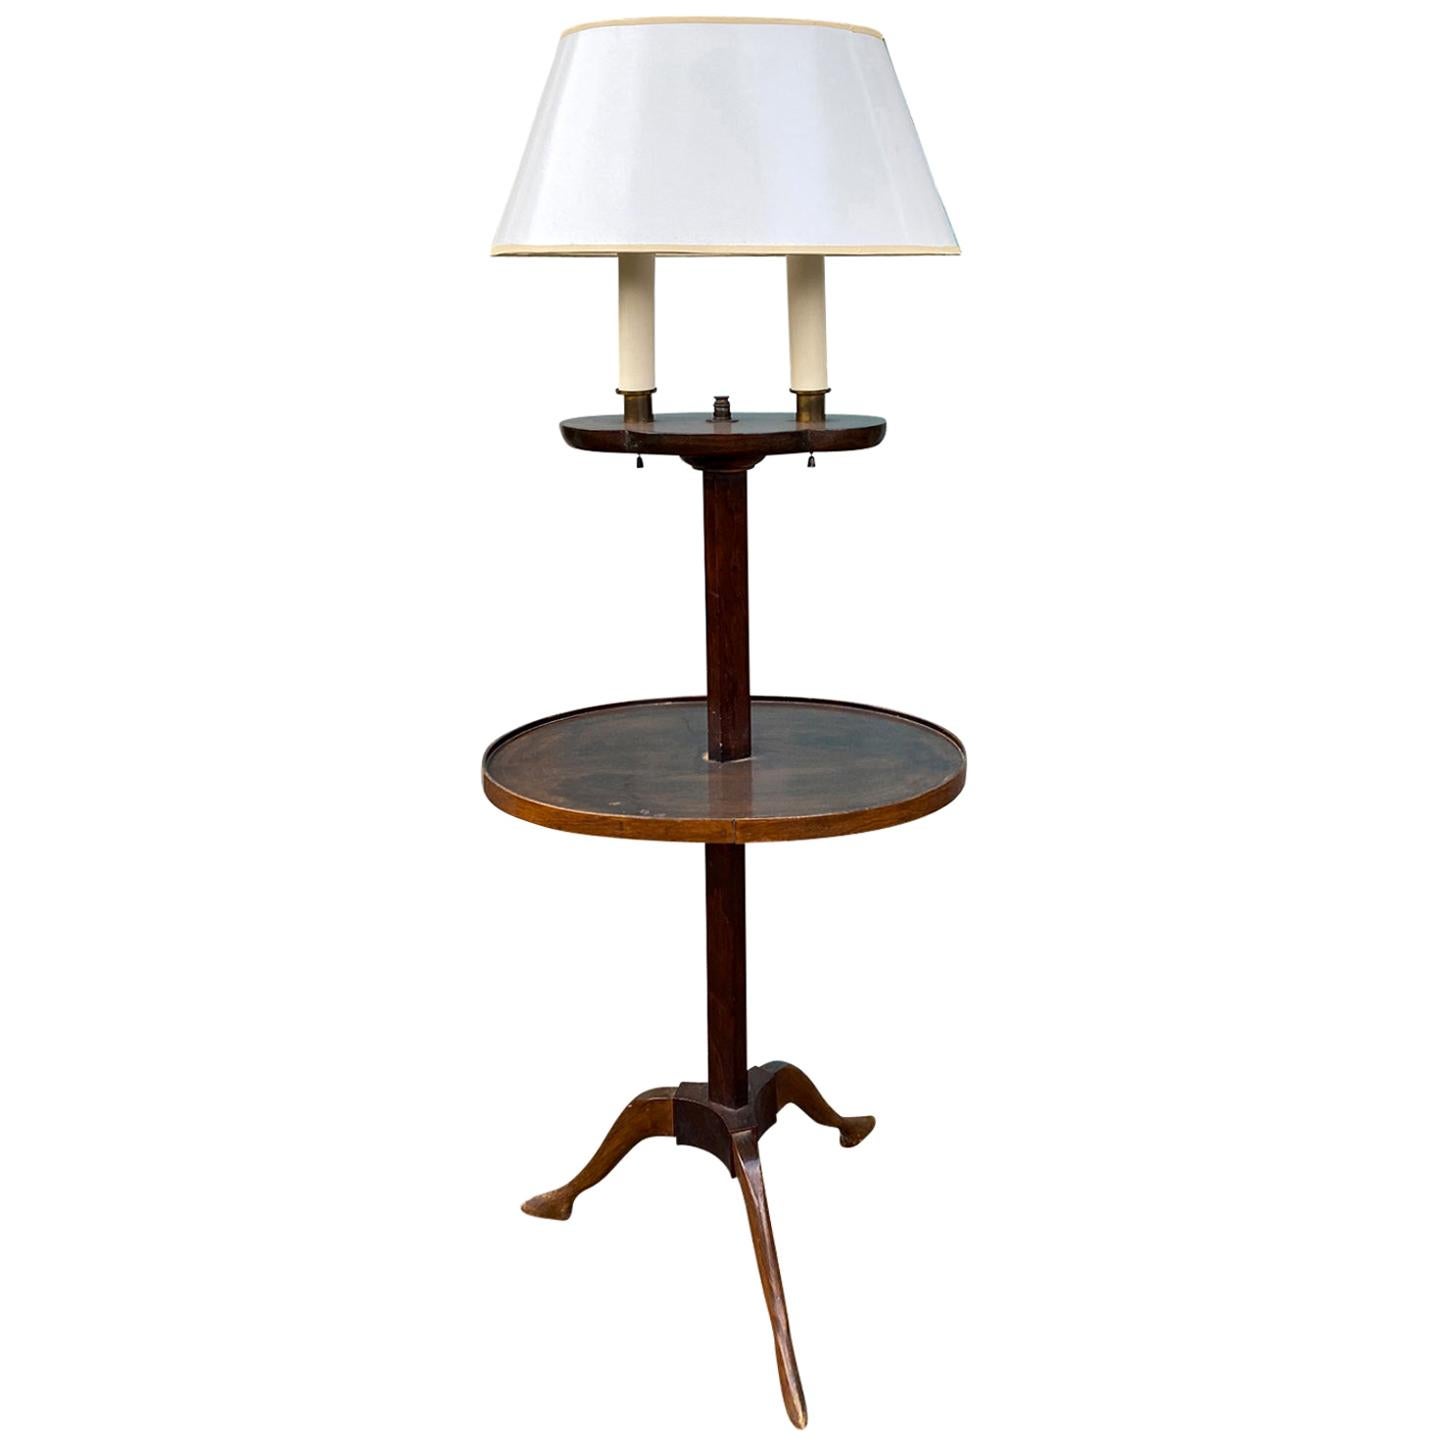 20th Century French Wooden Floor Lamp with Table